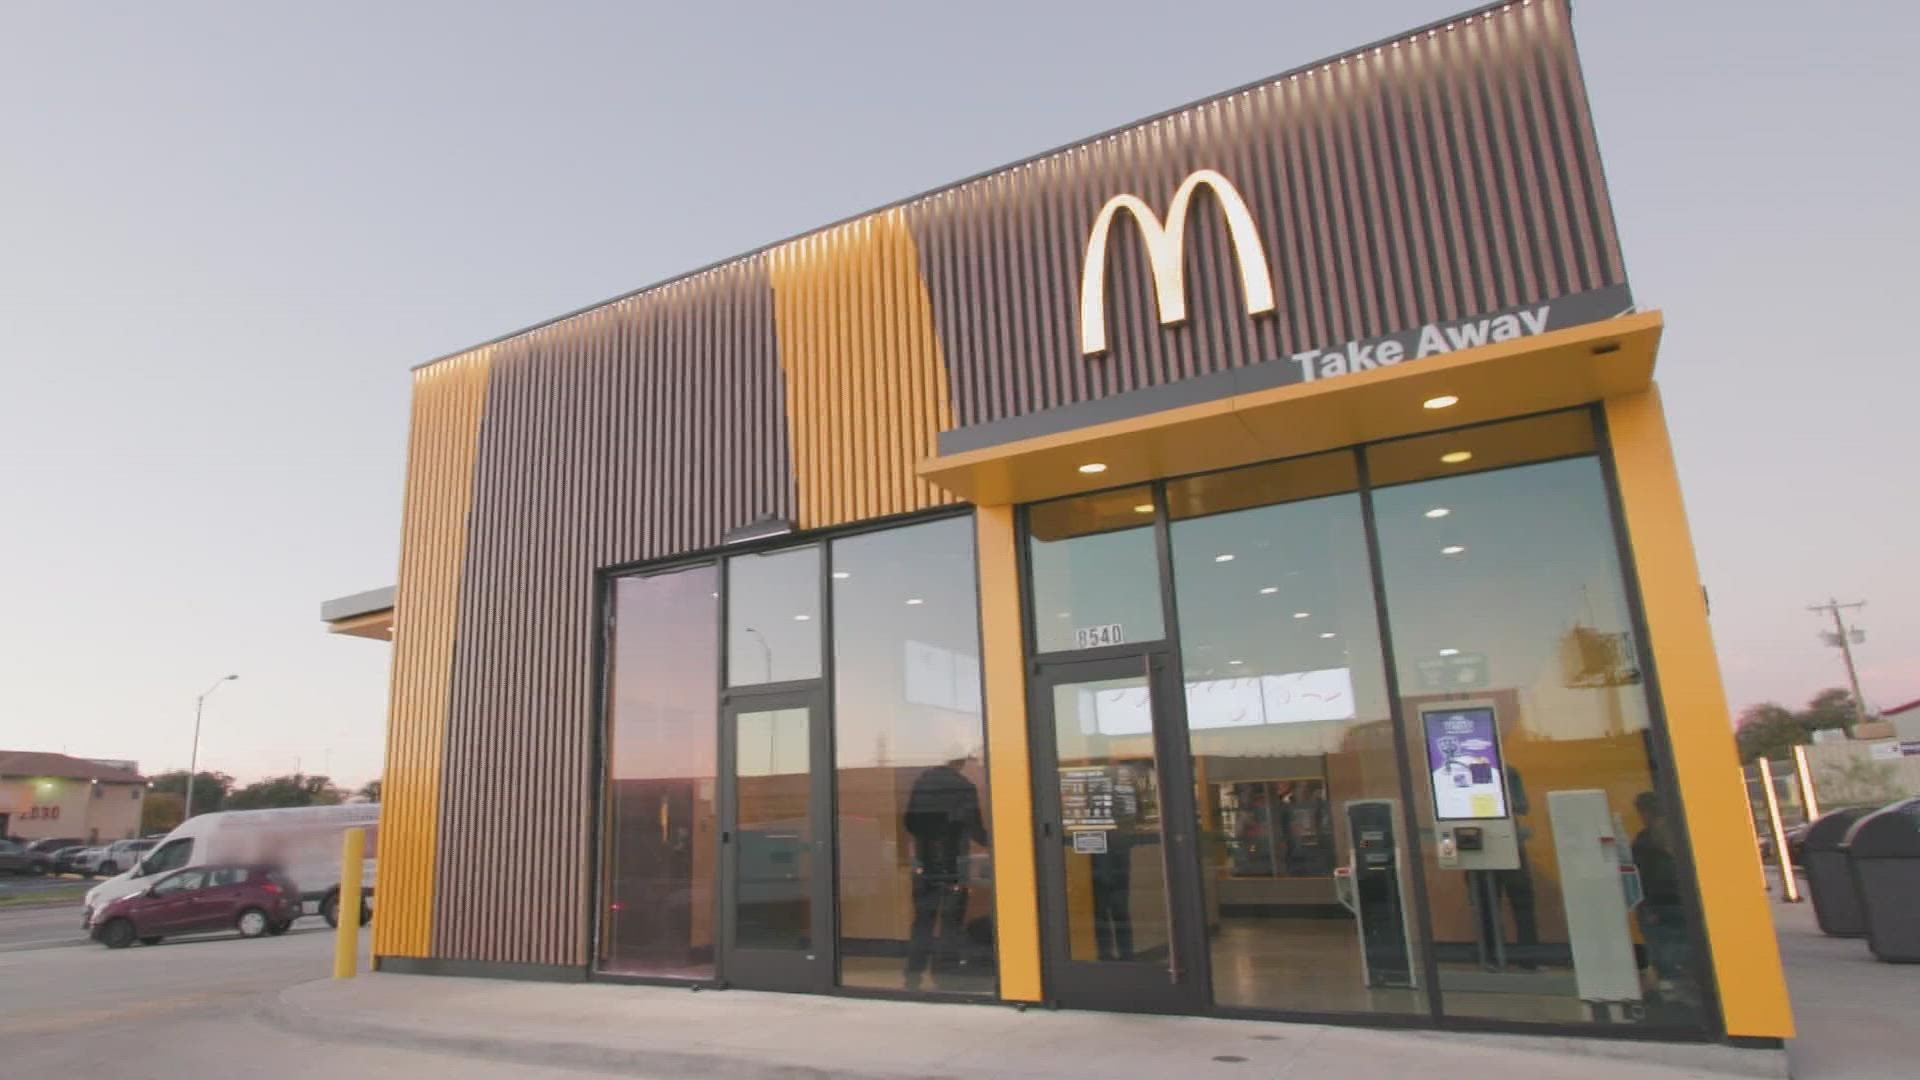 McDonald's has opened a "small format" restaurant in west Fort Worth.